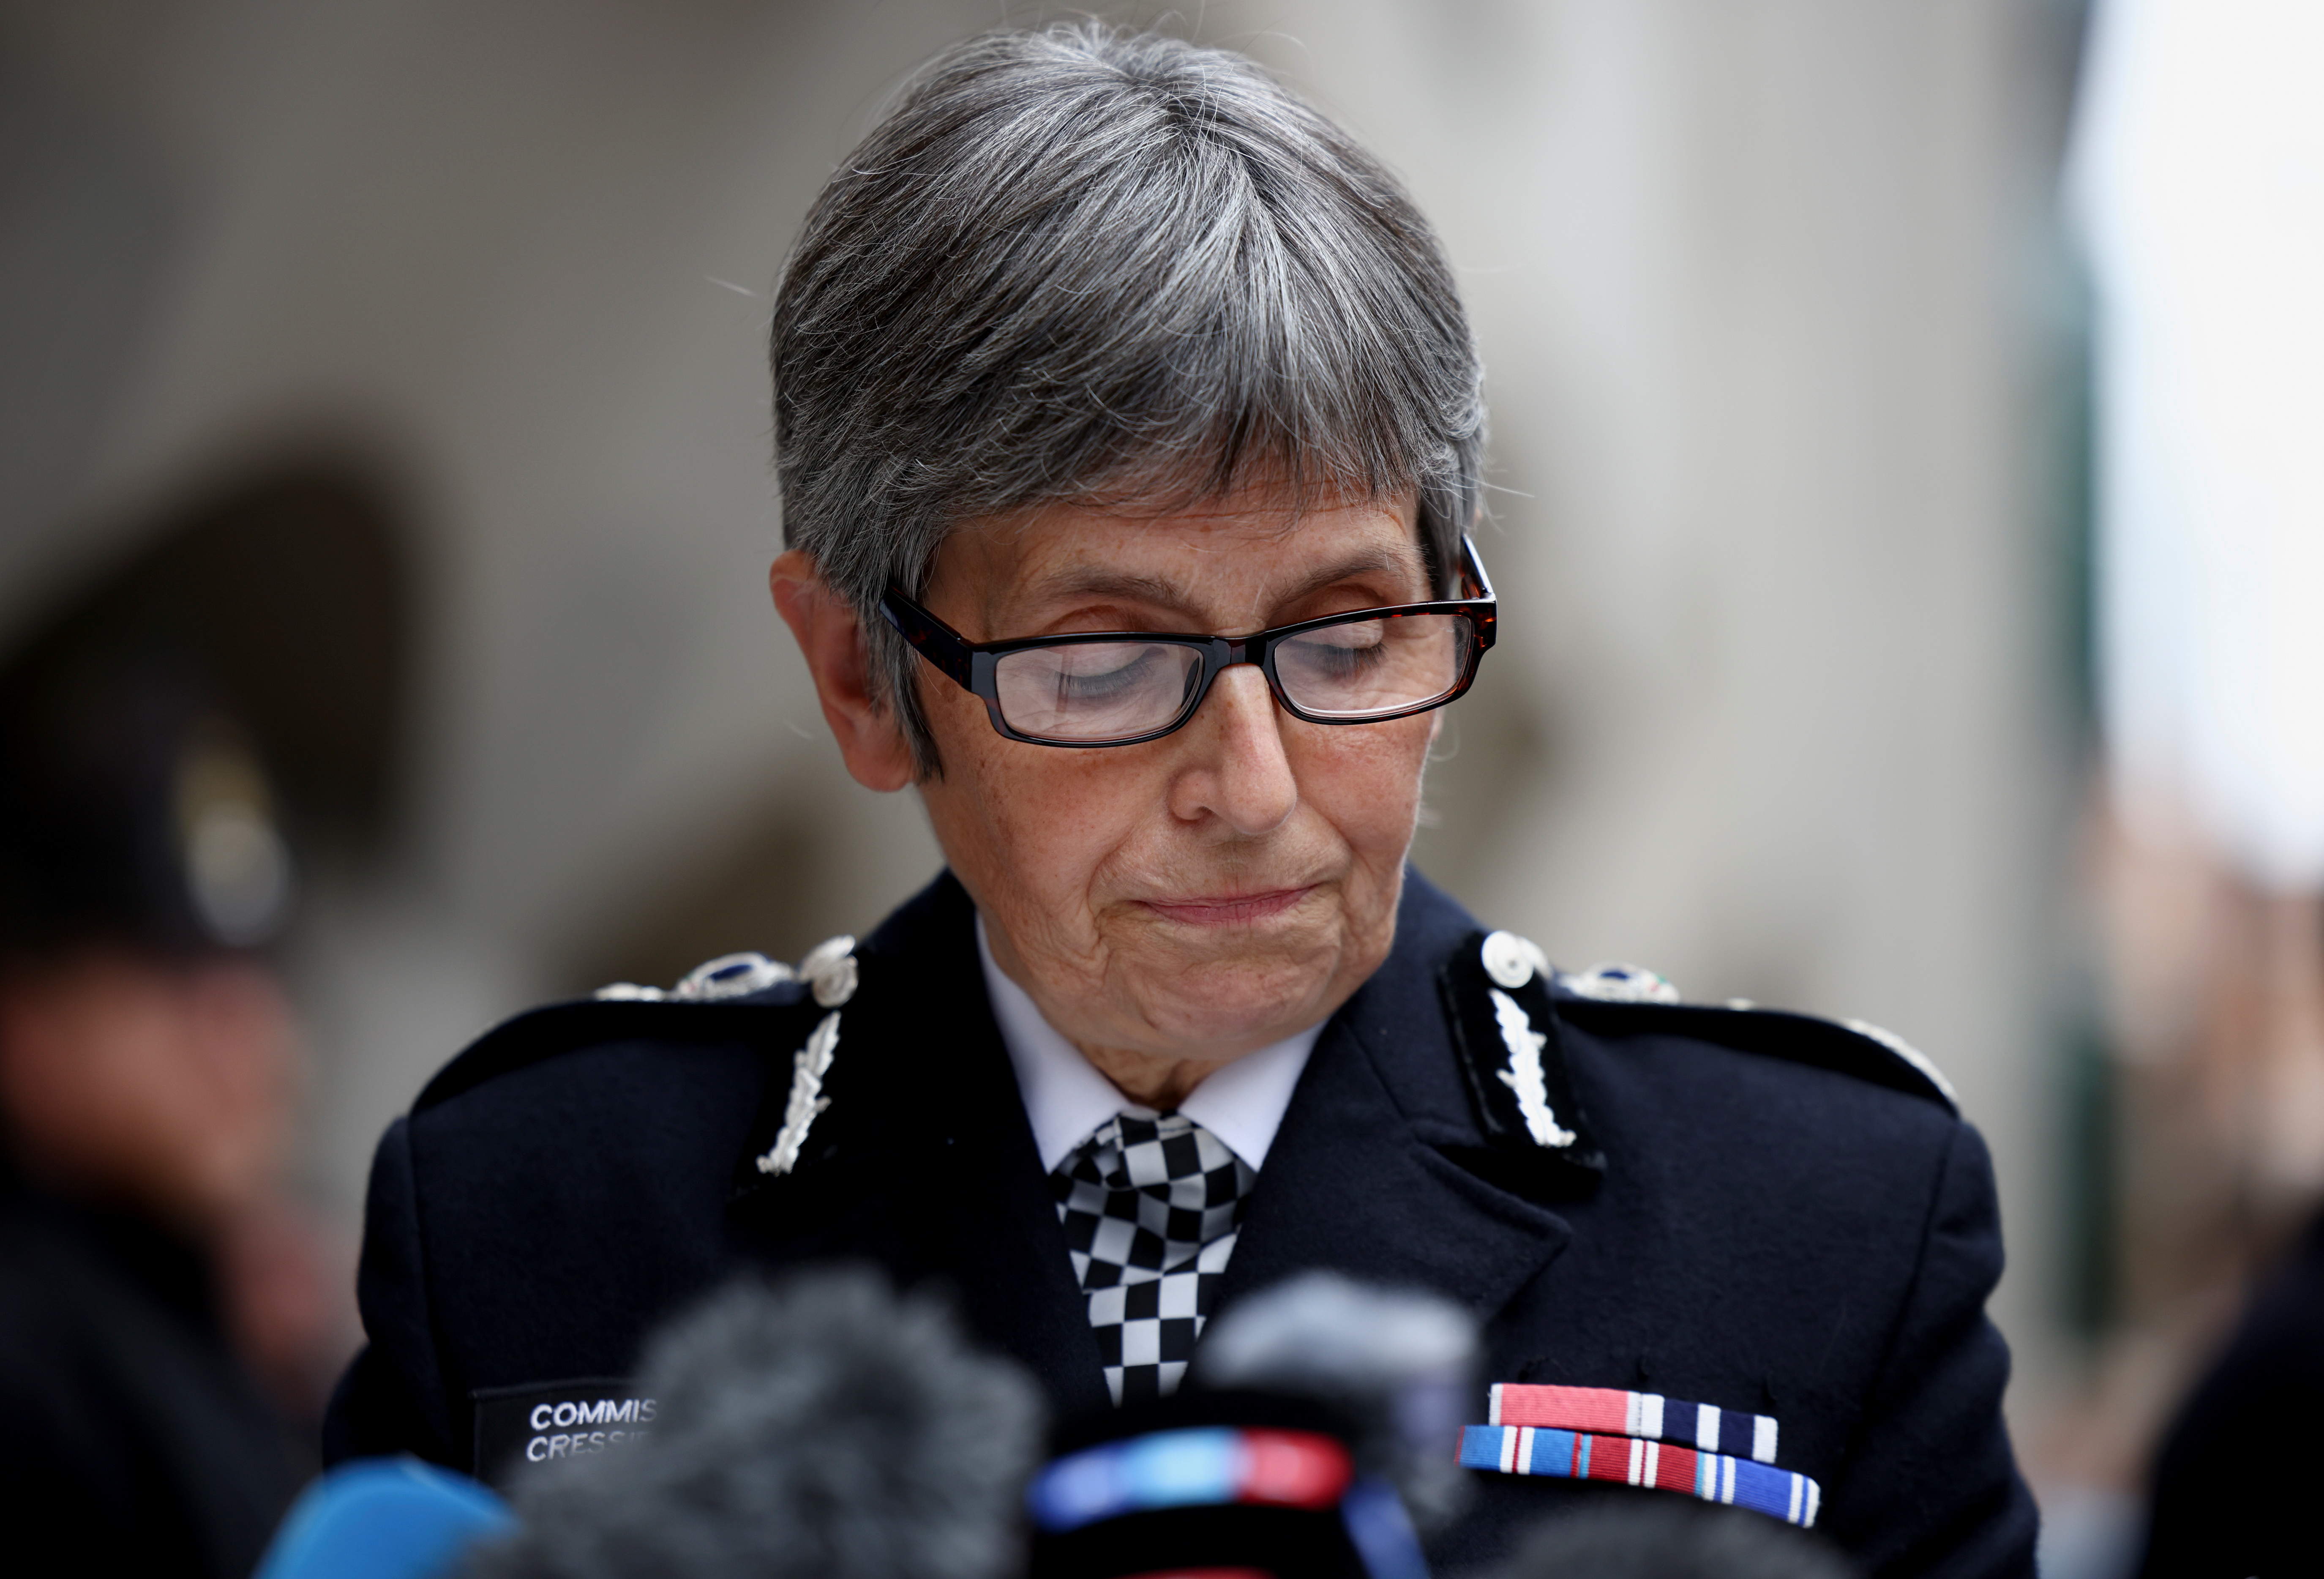 Metropolitan Police Commissioner Cressida Dick delivers a statement outside the Old Bailey, where police officer Wayne Couzens was sentenced following the murder of Sarah Everard, in London